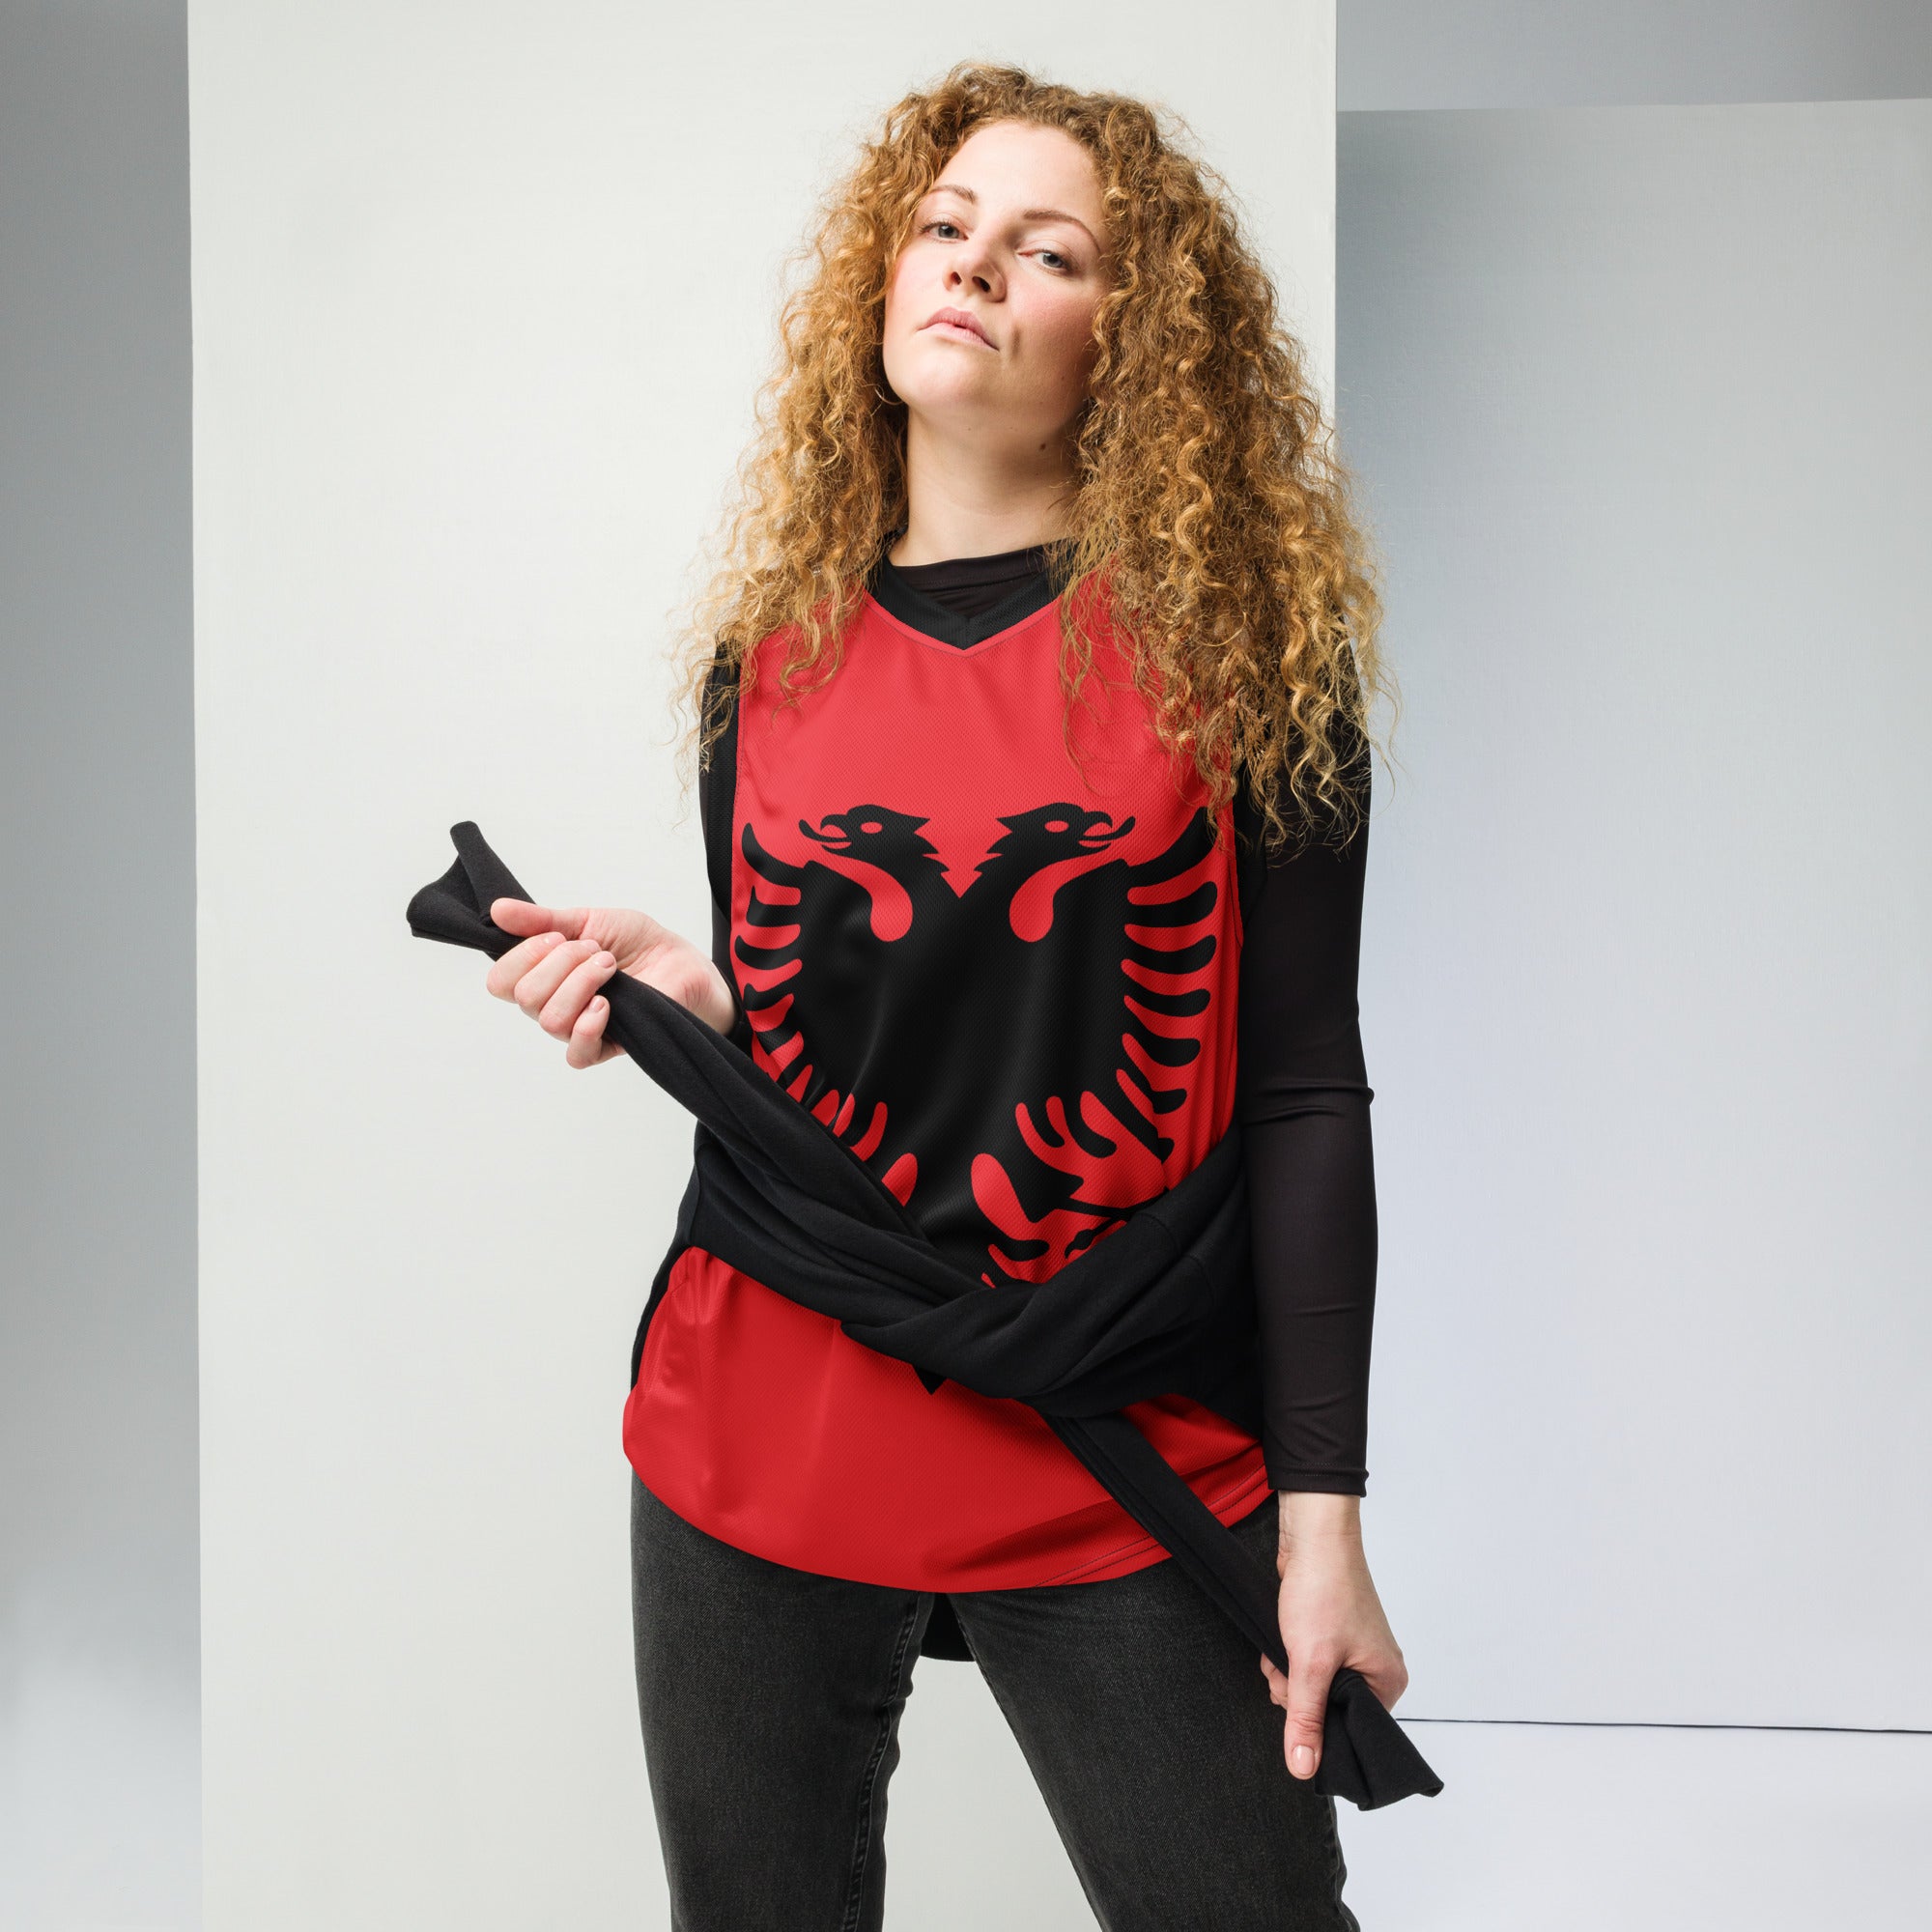 Albanian flag Recycled unisex basketball jersey